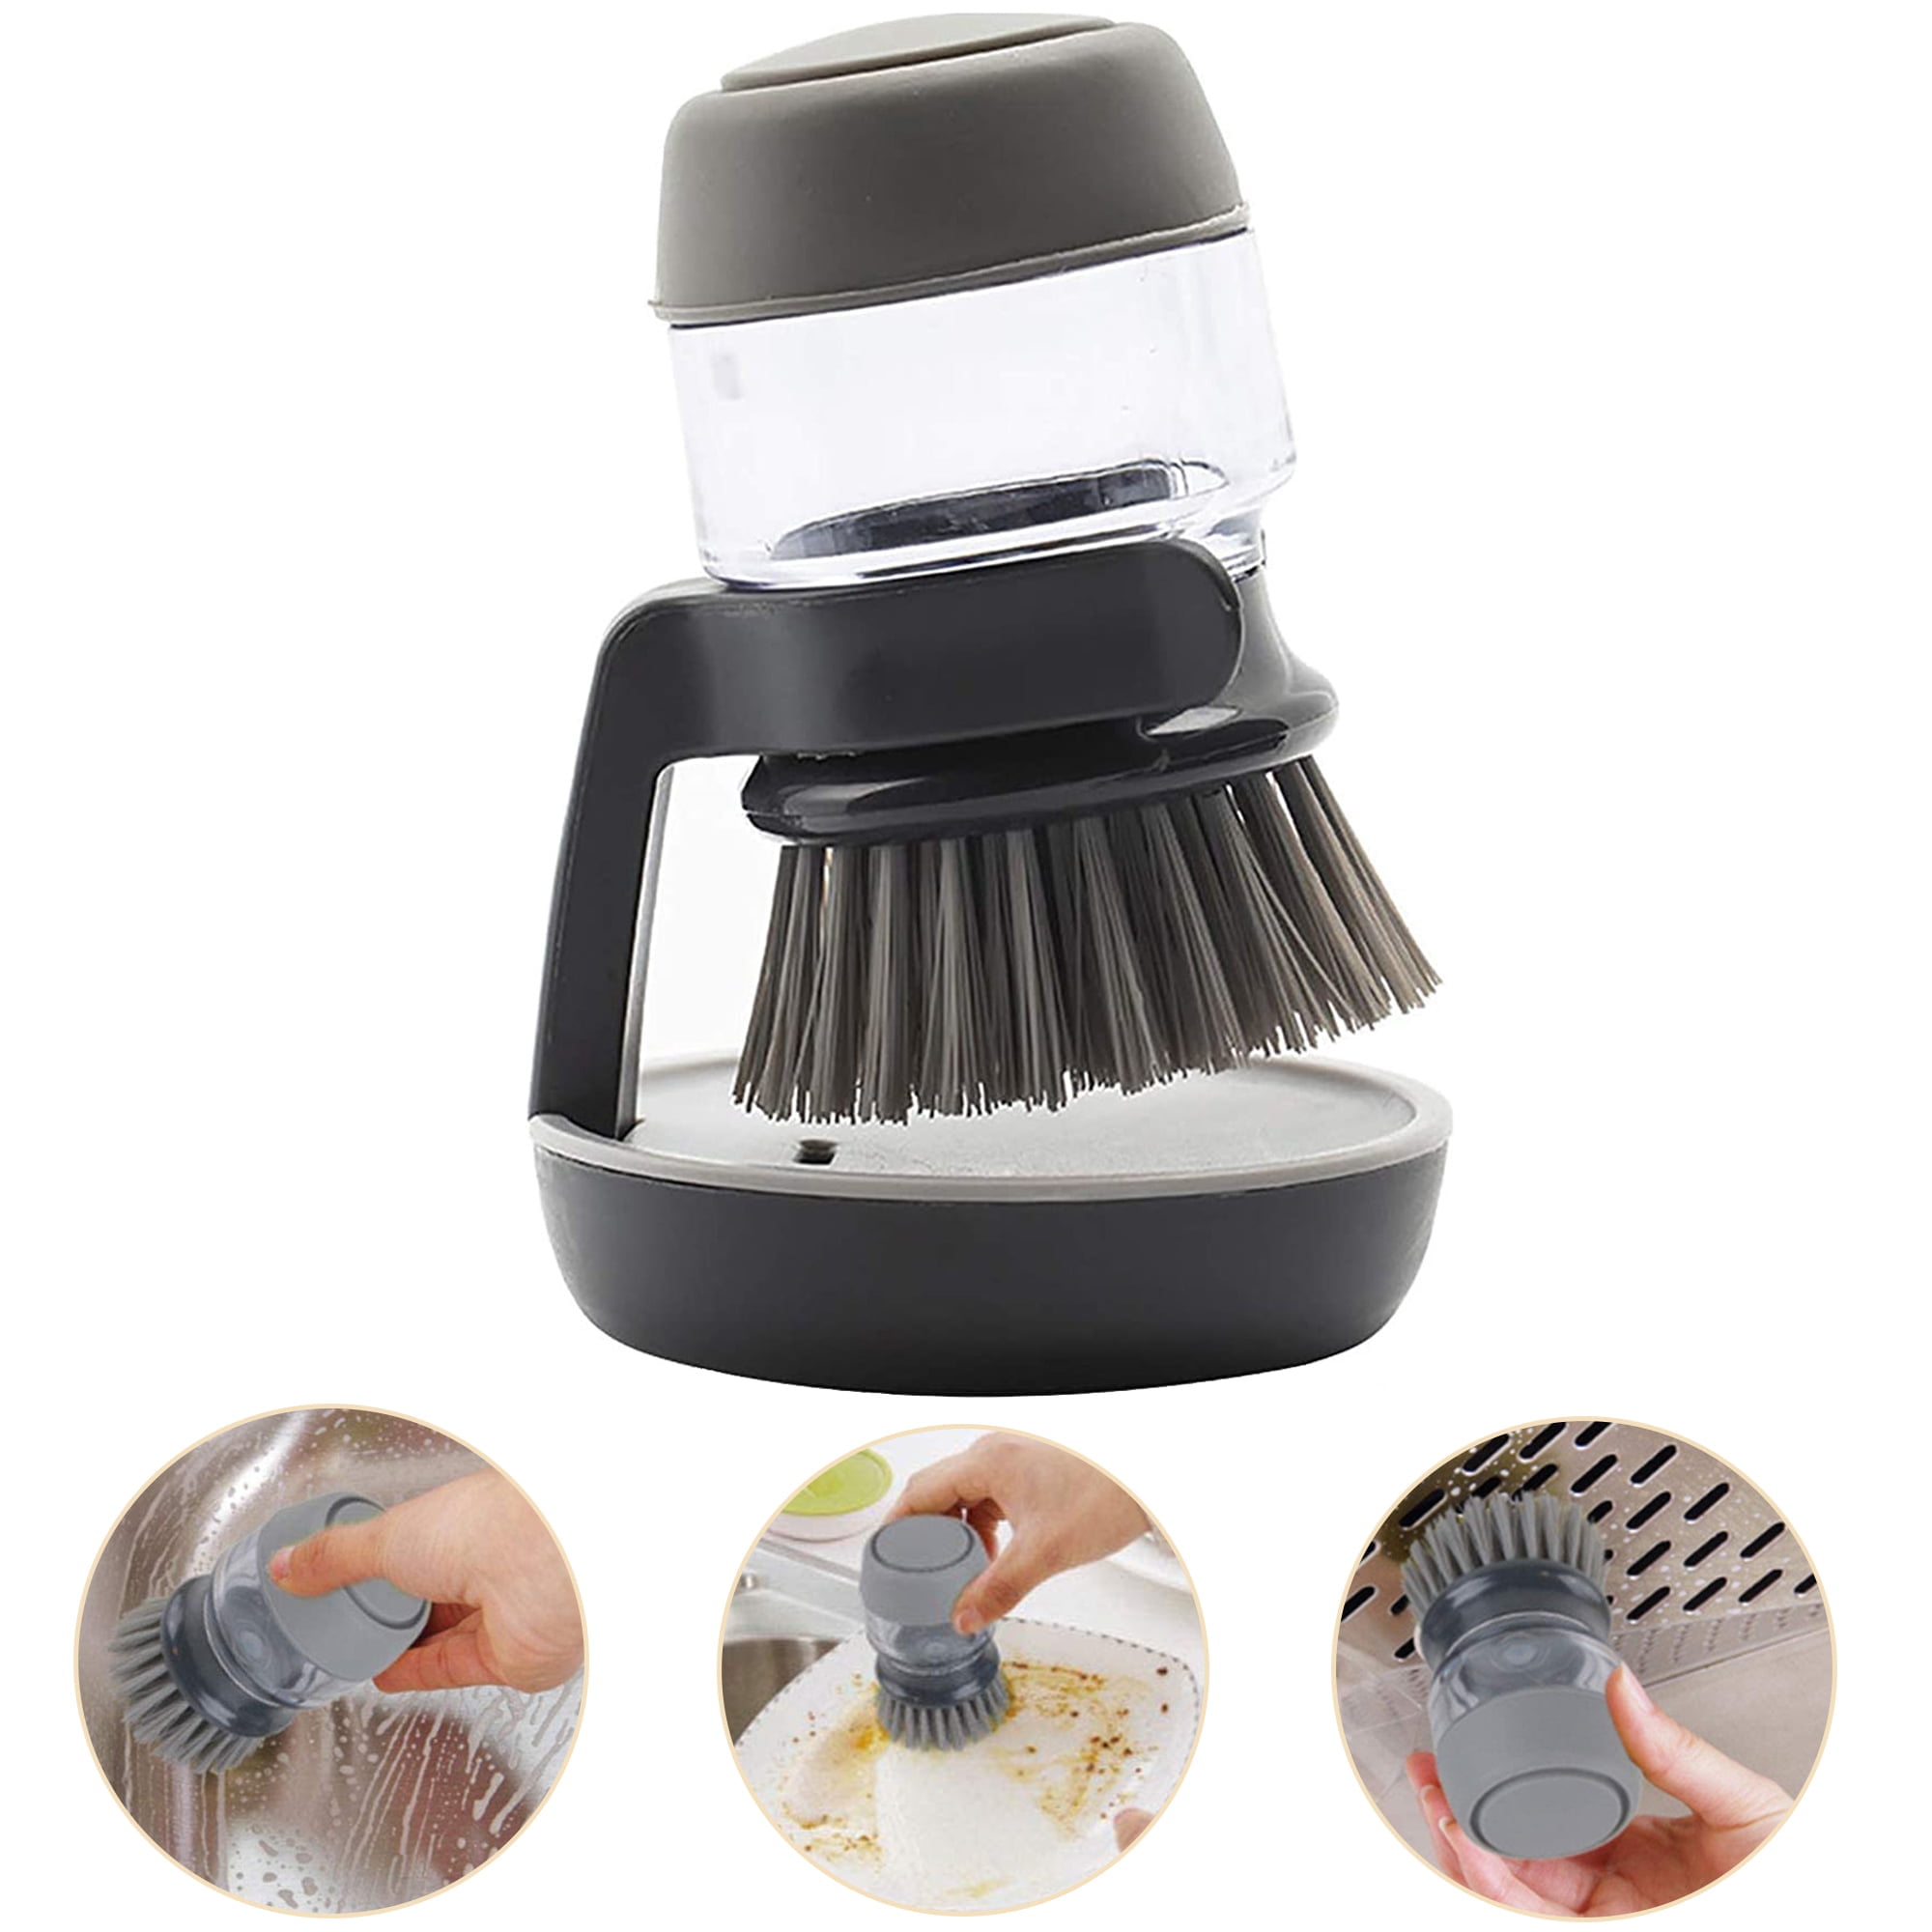 Soap Dispensing Dish Brush, Kitchen Hand Brush For Cleaning Dishes, Pots,  Pans And Sinks -- Gray V014dcbgre One Size